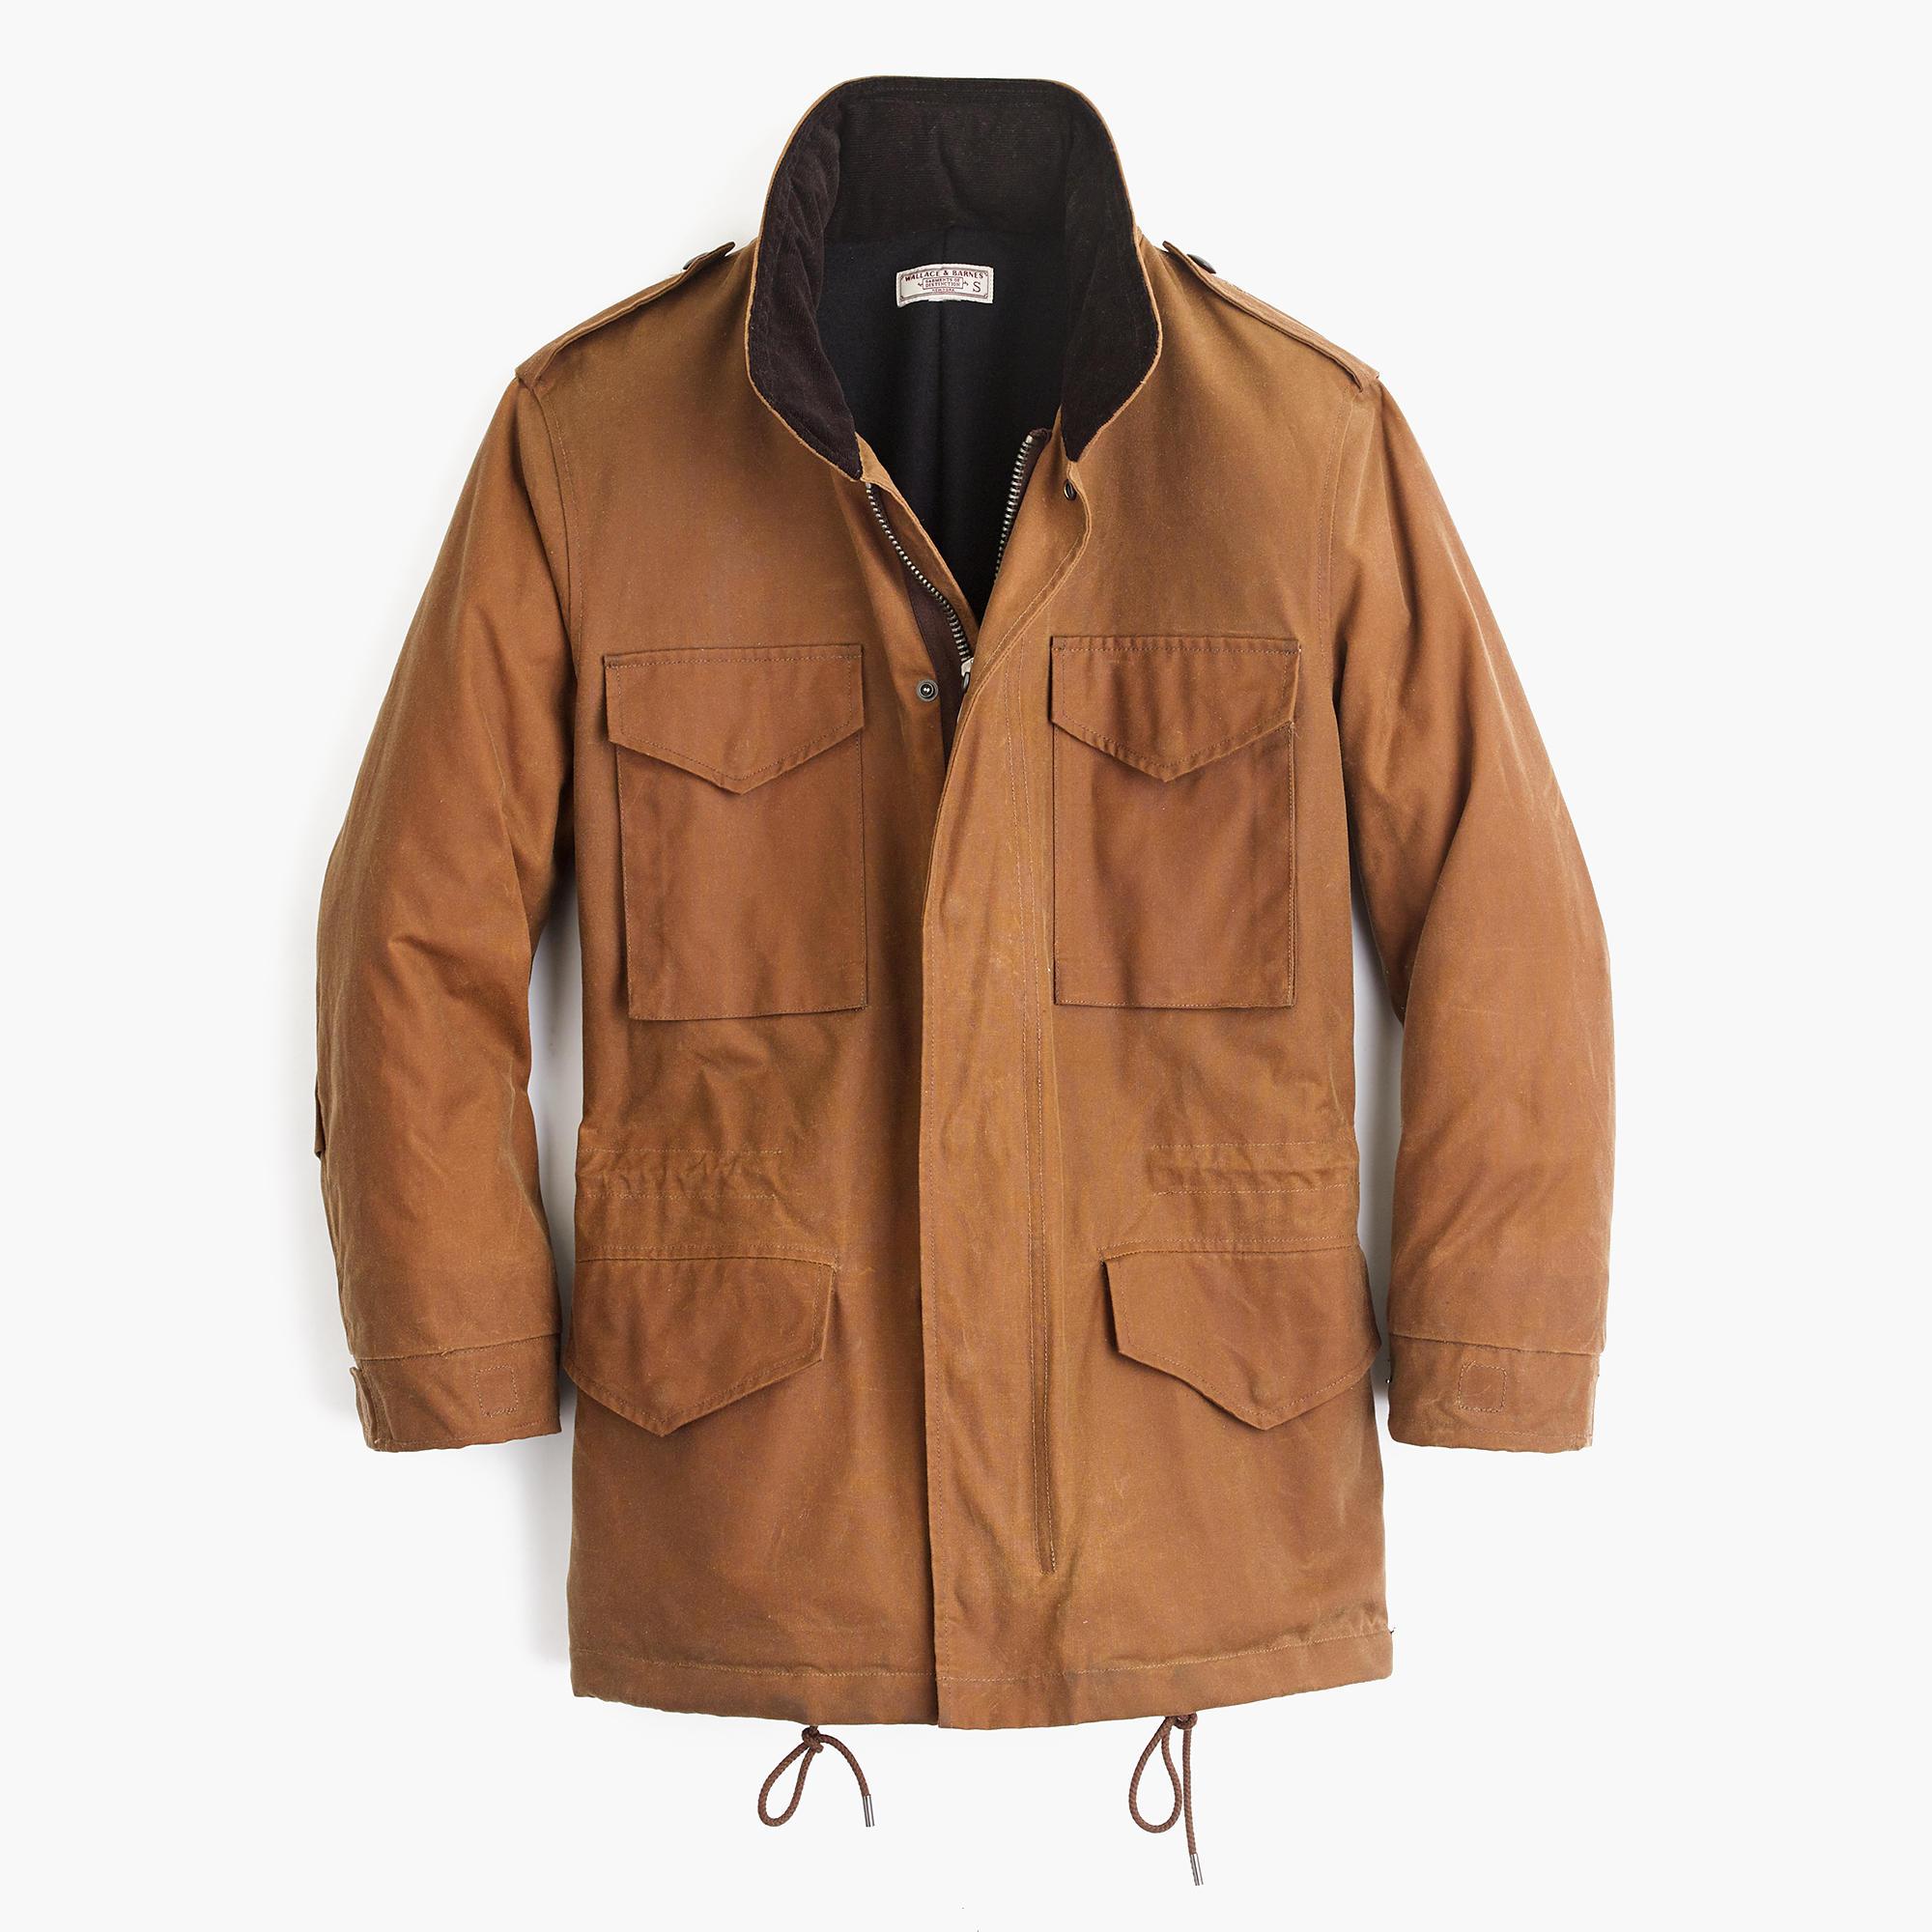 J.crew Wallace & Barnes Waxed Cotton M-65 Jacket in Brown for Men | Lyst